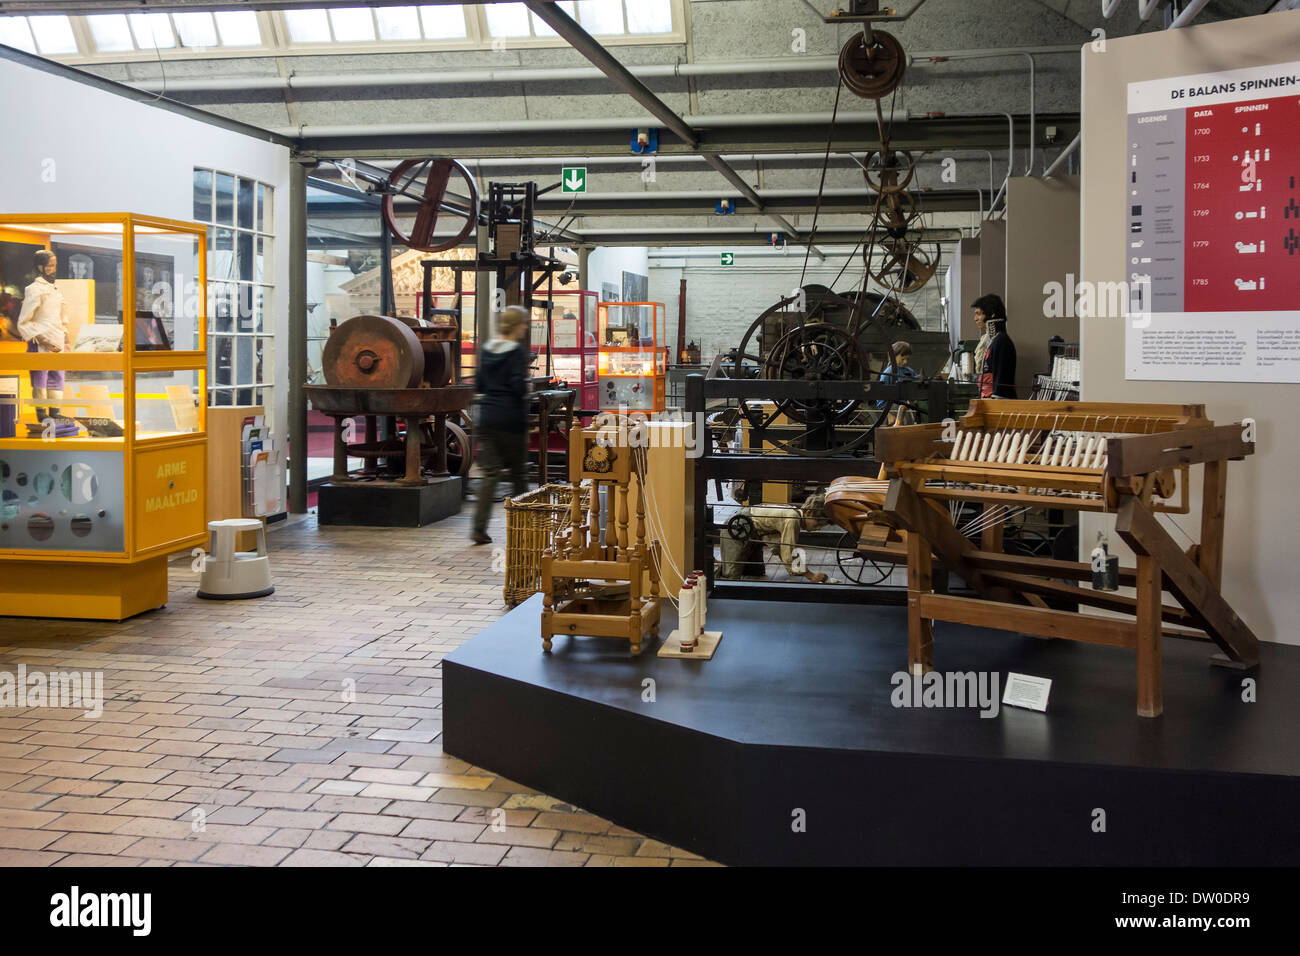 Sewing Revolution – Windham Textile and History Museum – The Mill